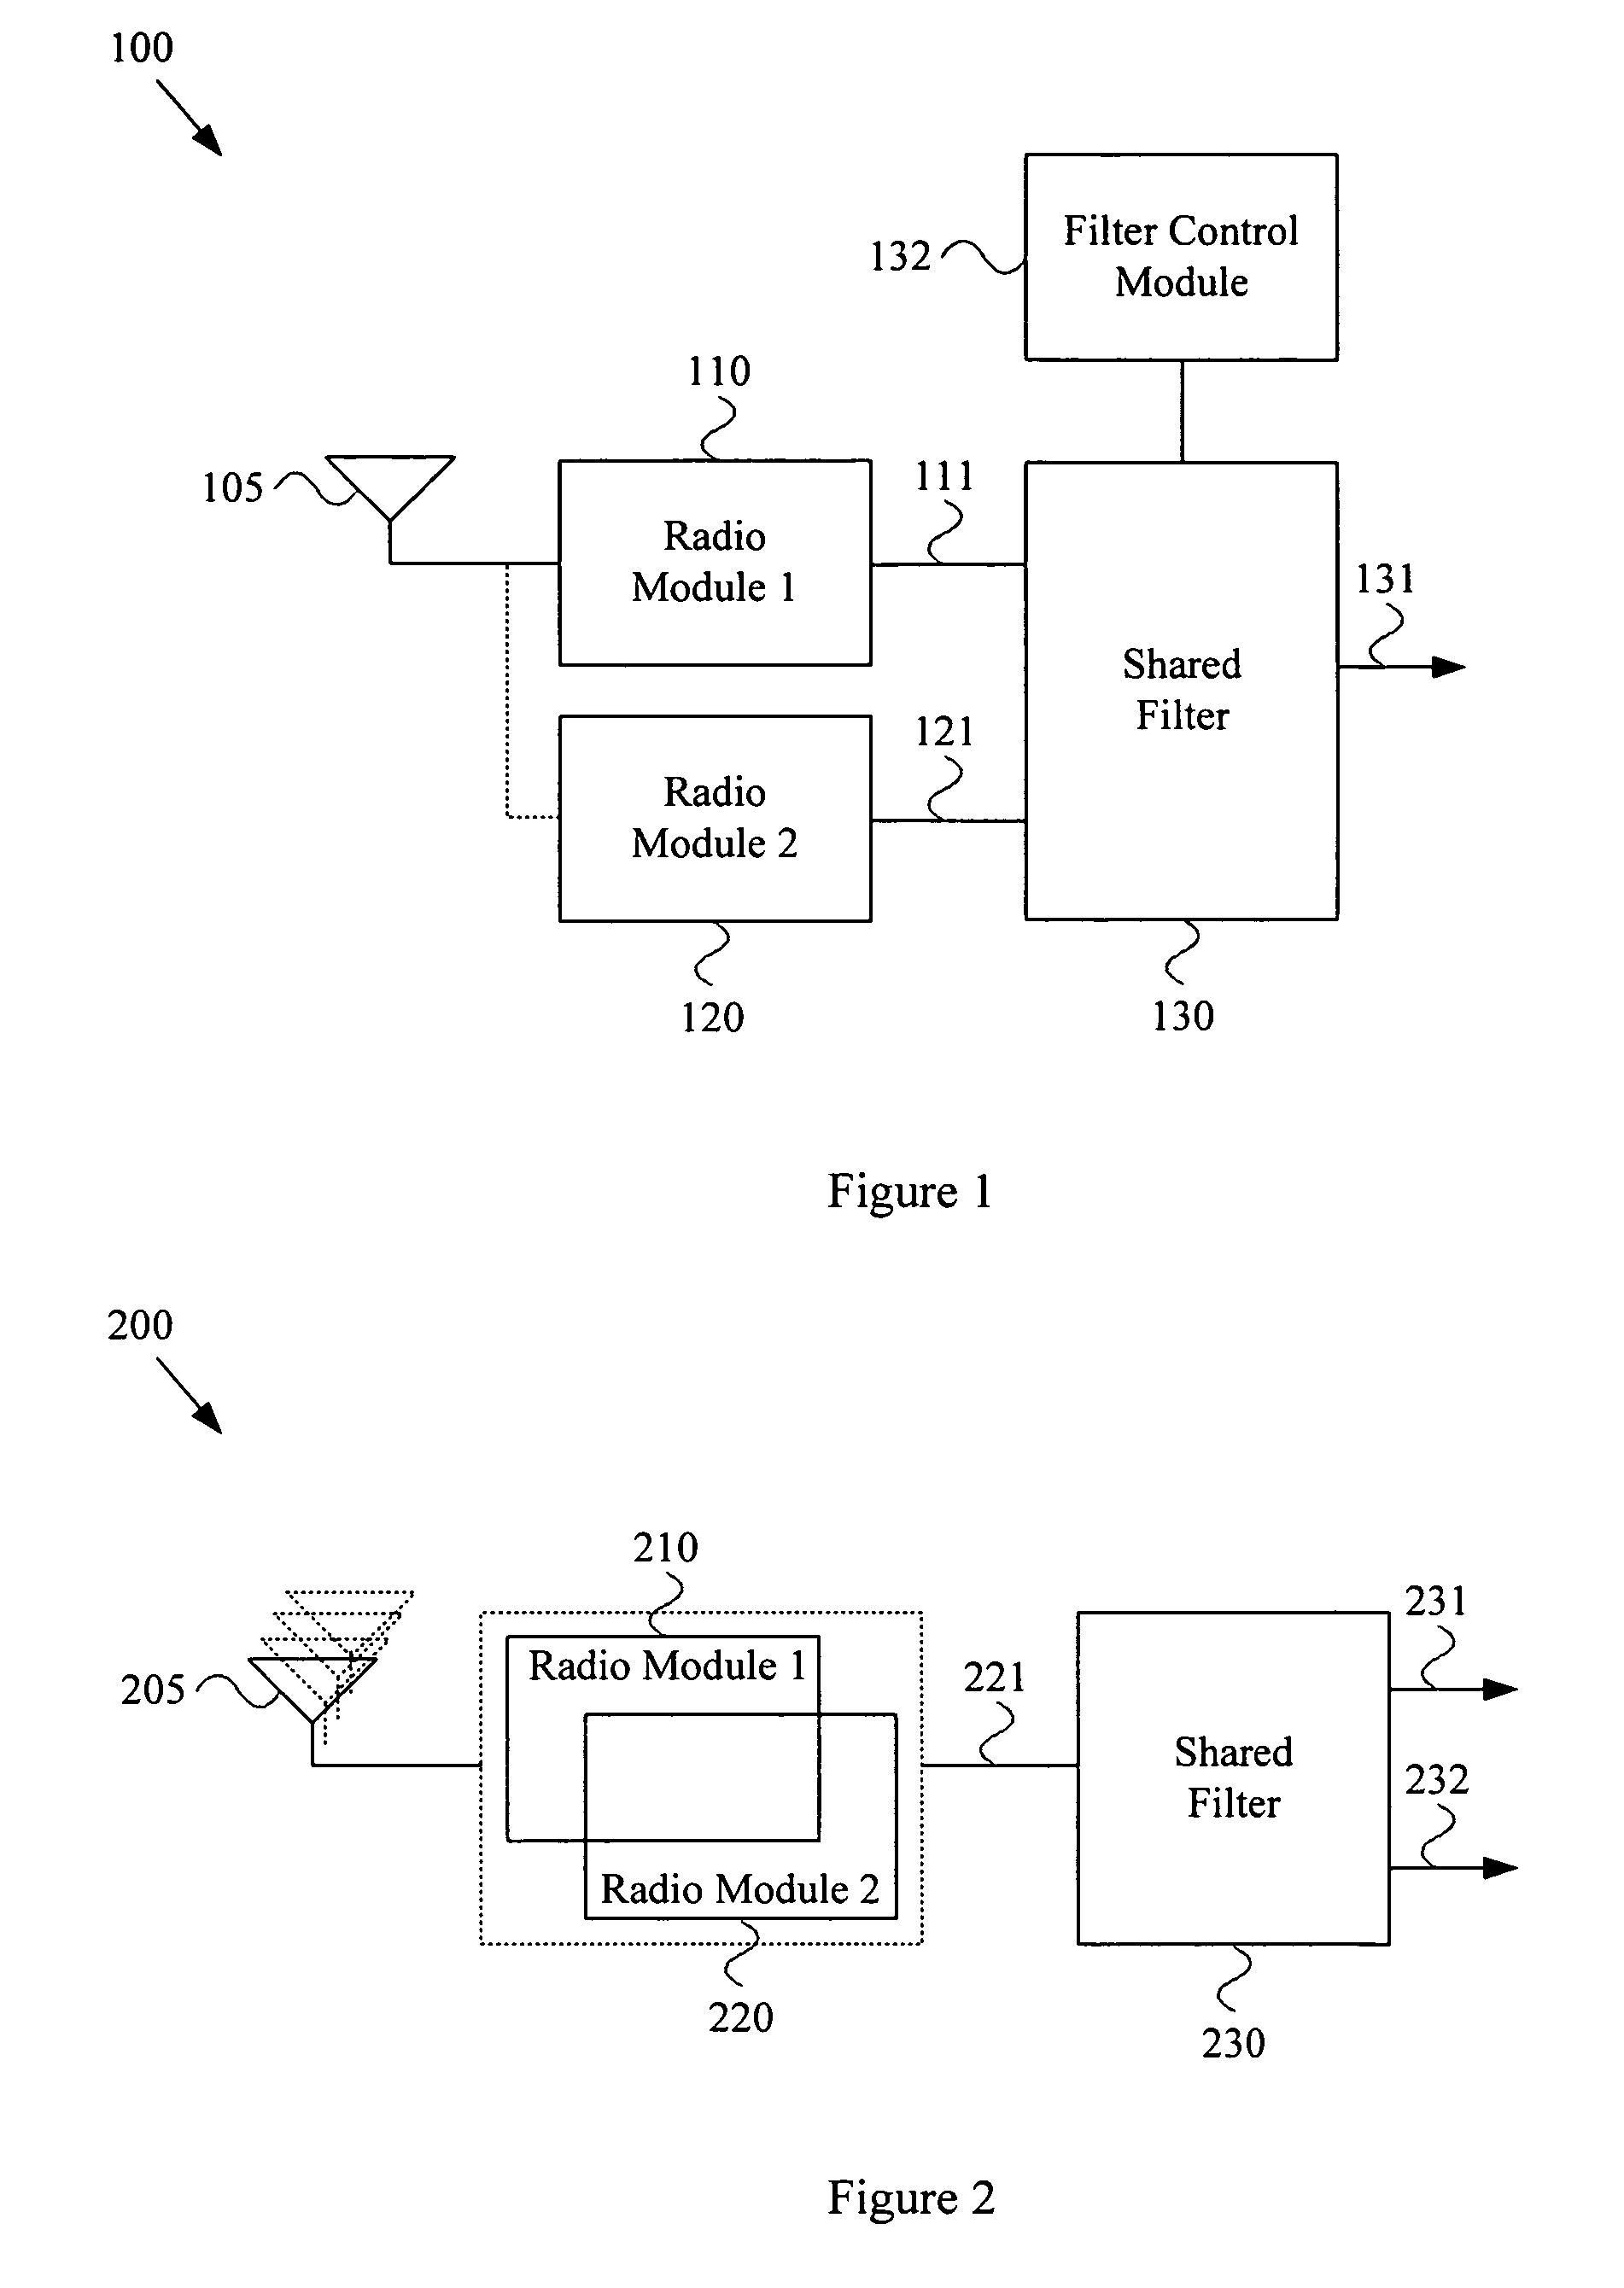 Multimode communication device with shared signal path programmable filter